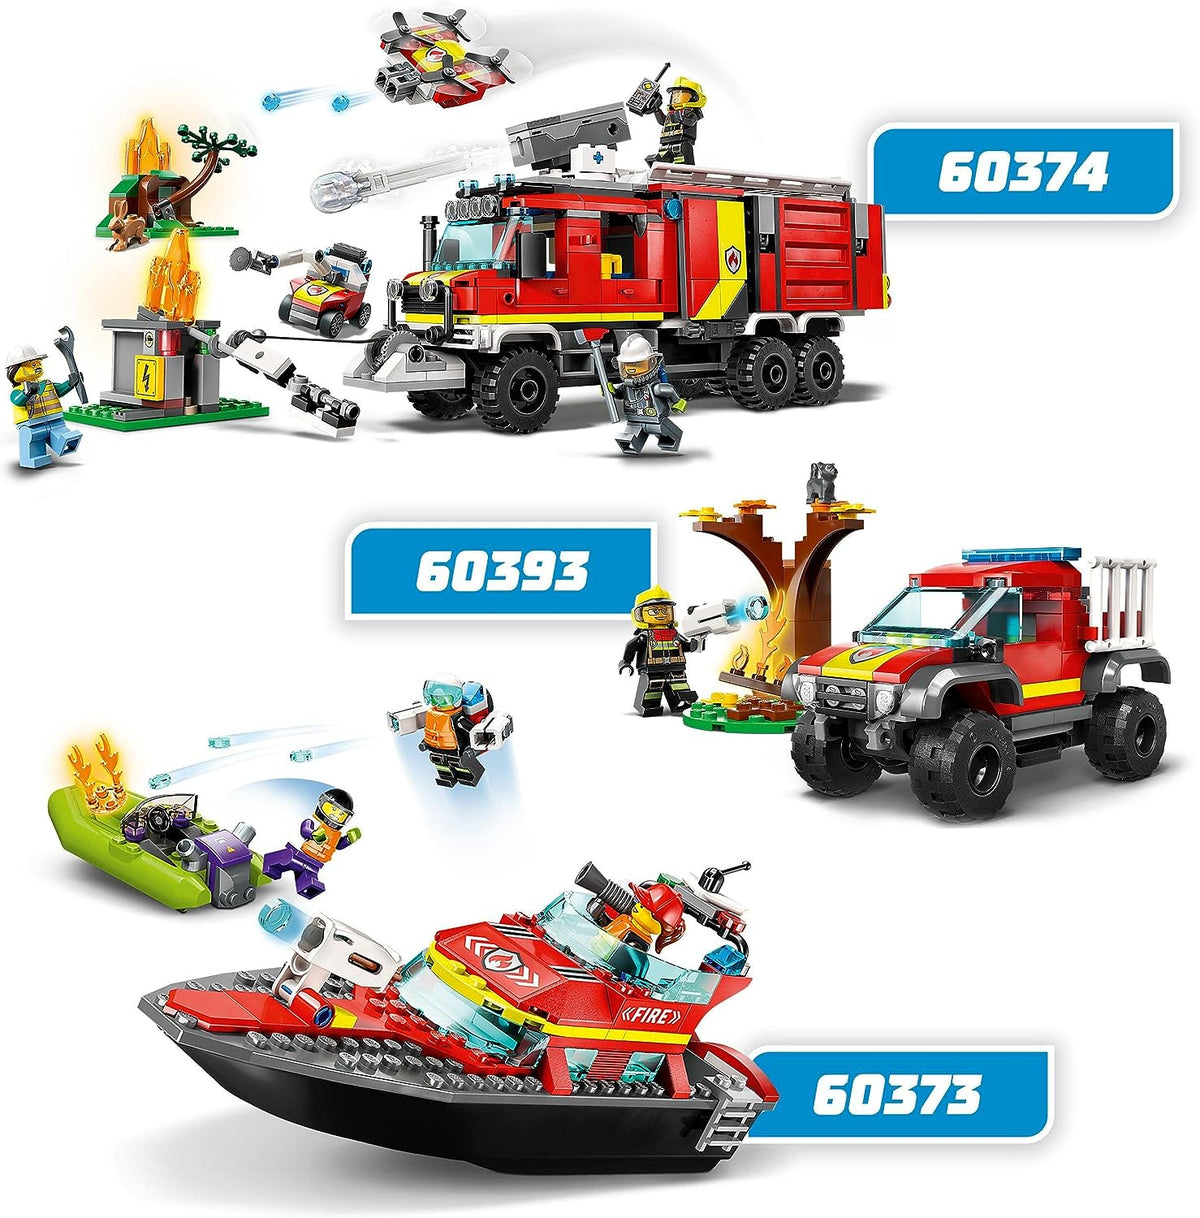 LEGO City Fire Rescue Boat Toy Building Set